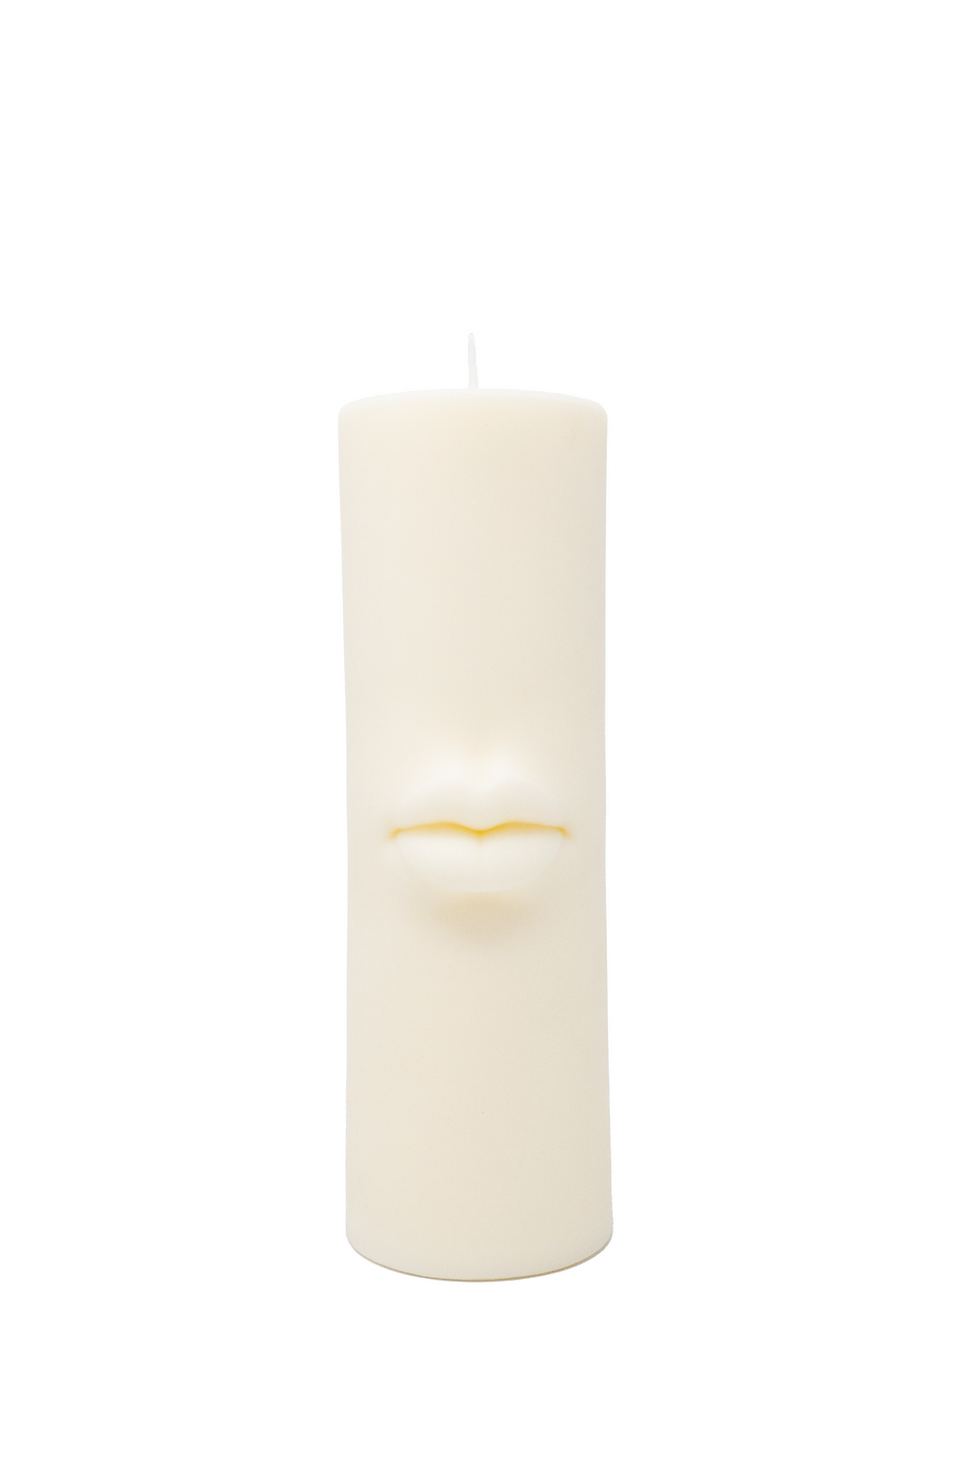 Lips Pillar Candle in White